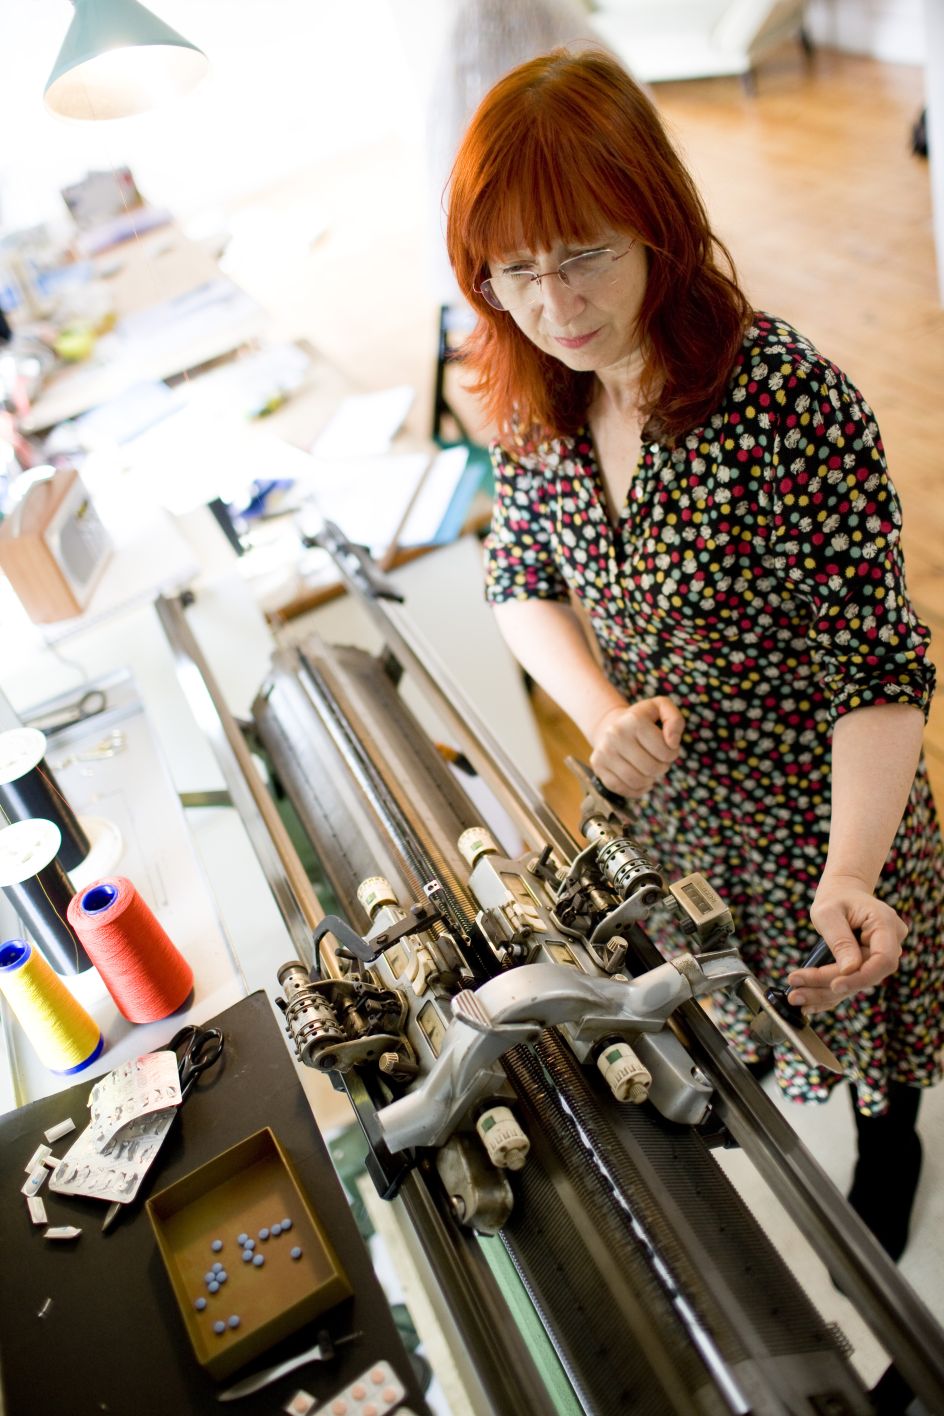 Susie Freeman with her knitting machine. Photography by Tom Lee